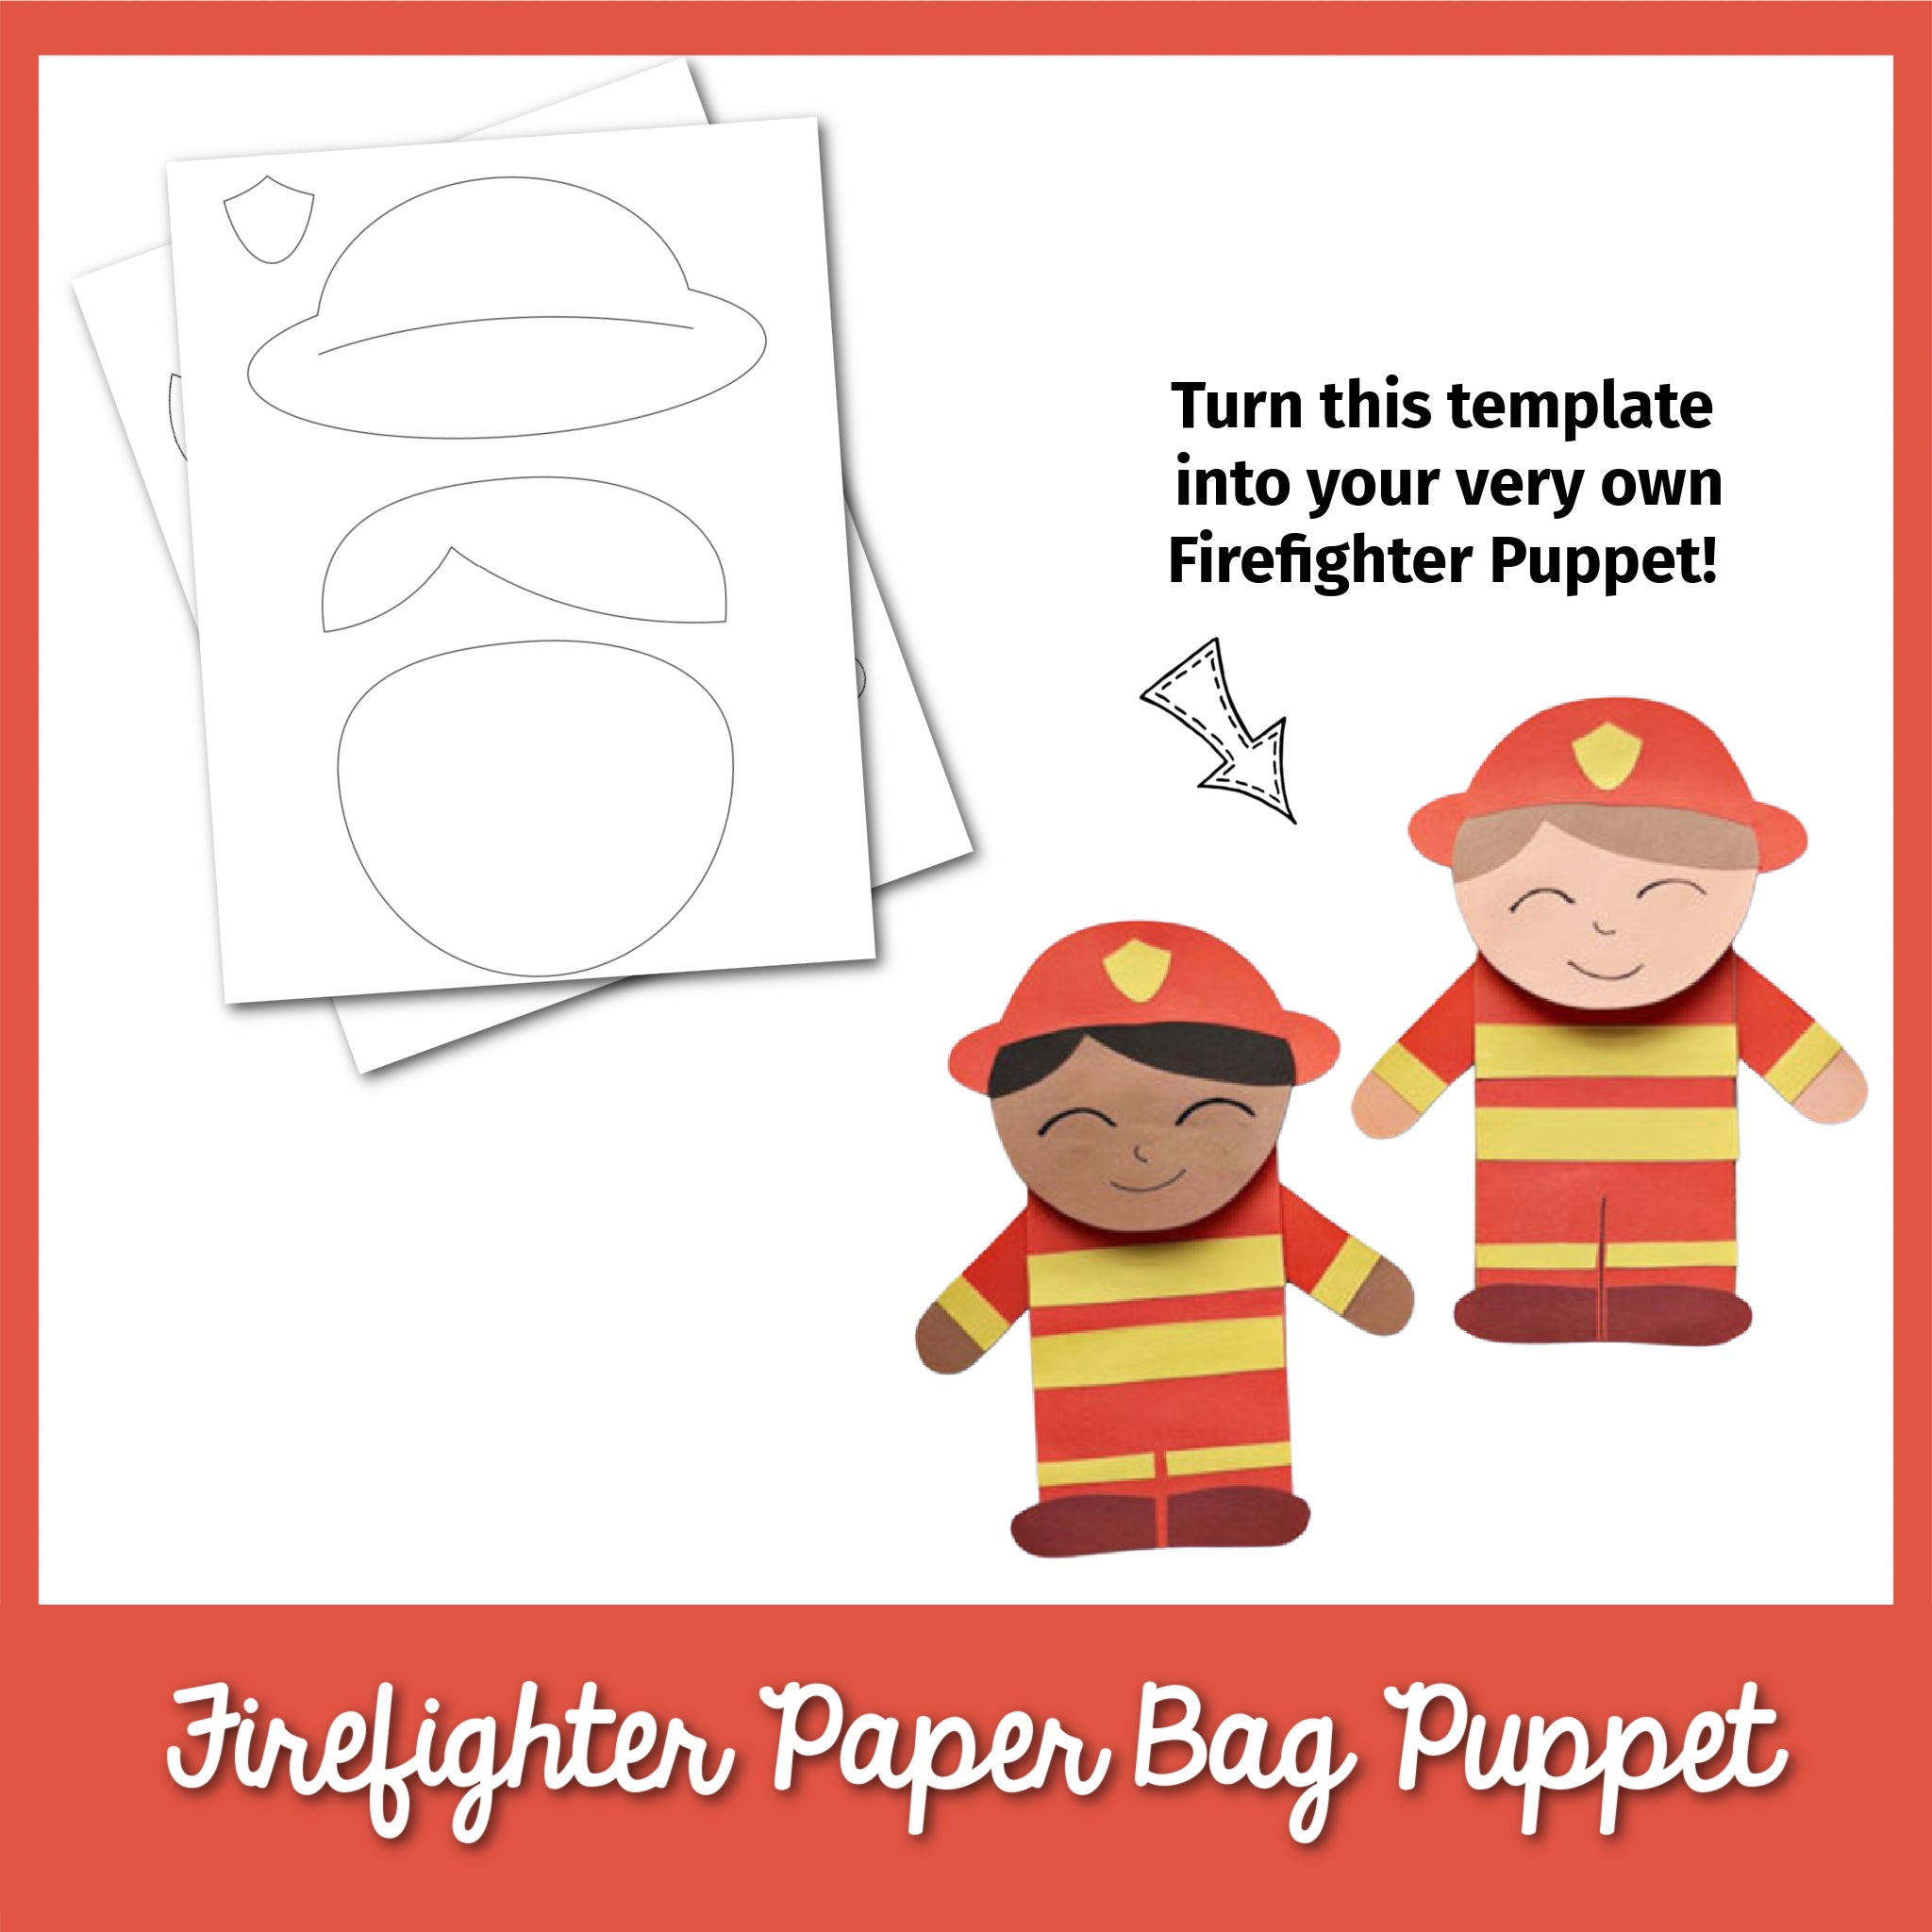 Frog Paper Bag Puppet Craft Template